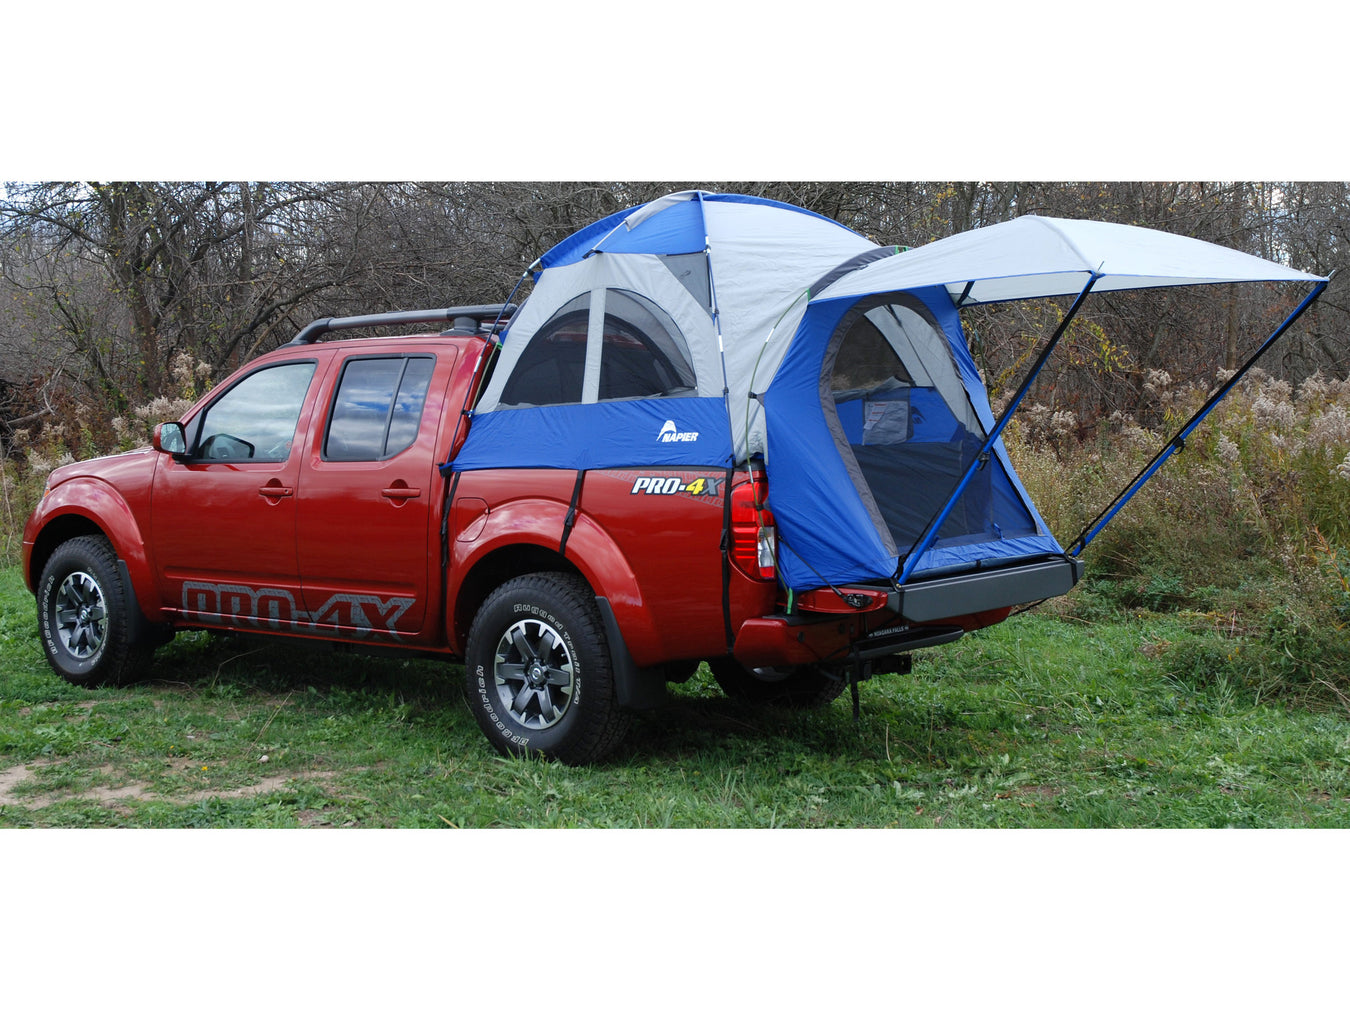 Camping & Outdoor Equipment